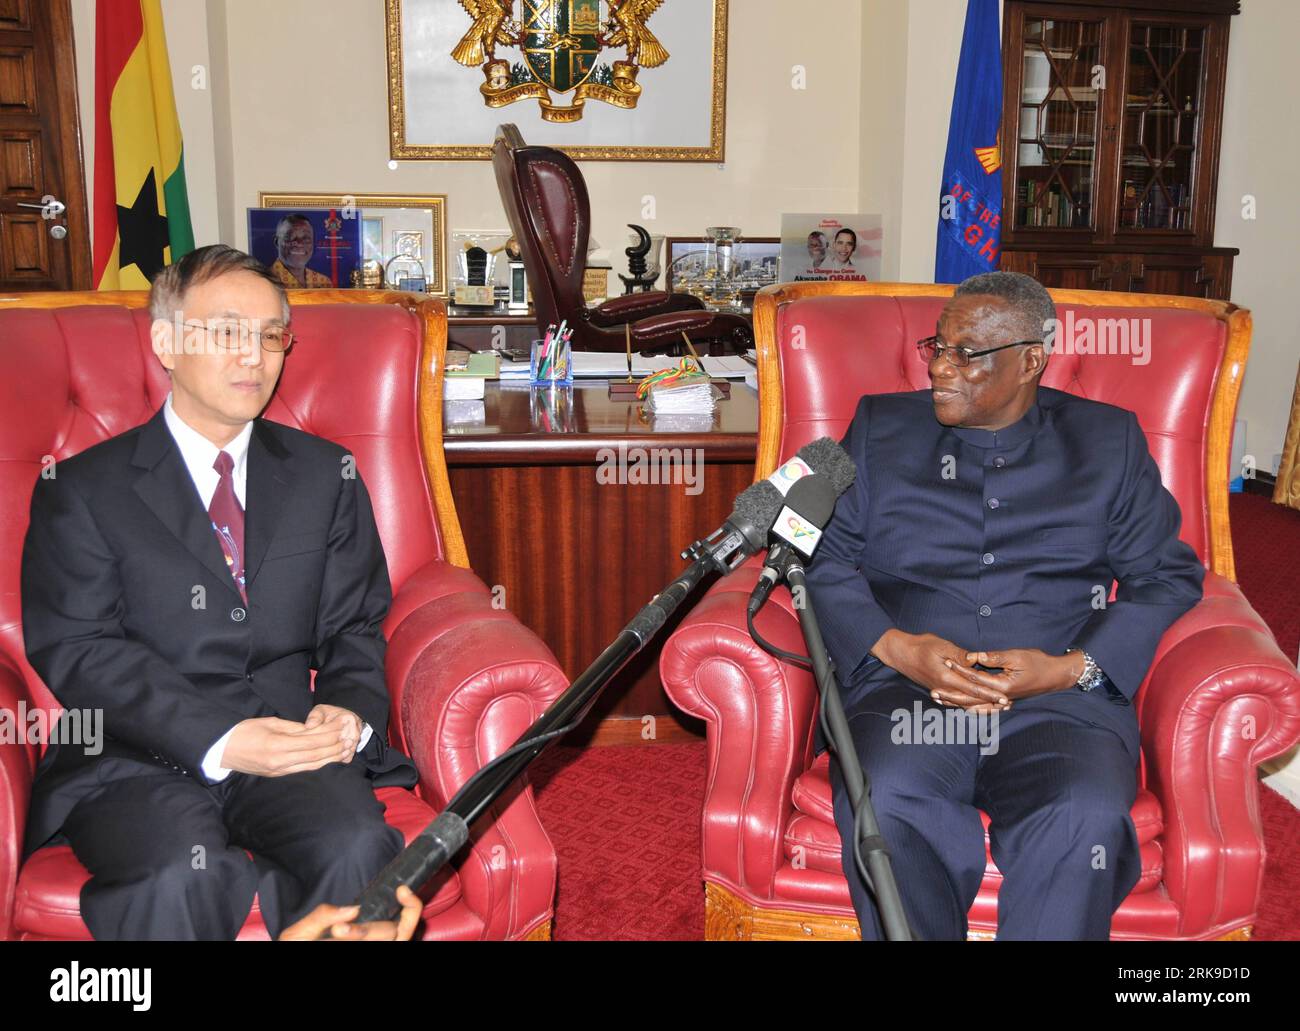 Bildnummer: 54169120  Datum: 24.06.2010  Copyright: imago/Xinhua (100625) -- ACCRA, June 25, 2010 (Xinhua) -- Ghanaian President John Evans Atta Mills (R) meets with the outgoing Chinese Ambassador to Ghana Yu Wenzhe in Accra, Ghana, June 24, 2010. The Ghanaian President said here on Thursday that Ghana valued its relations with China and would not allow anything to derail the vision for the two countries. (Xinhua/Bai Jingshan) (lyx) GHANA-PRESIDENT-CHINA-RELATIONS PUBLICATIONxNOTxINxCHN Politik People kbdig xub 2010 quer premiumd xint      54169120 Date 24 06 2010 Copyright Imago XINHUA 100 6 Stock Photo